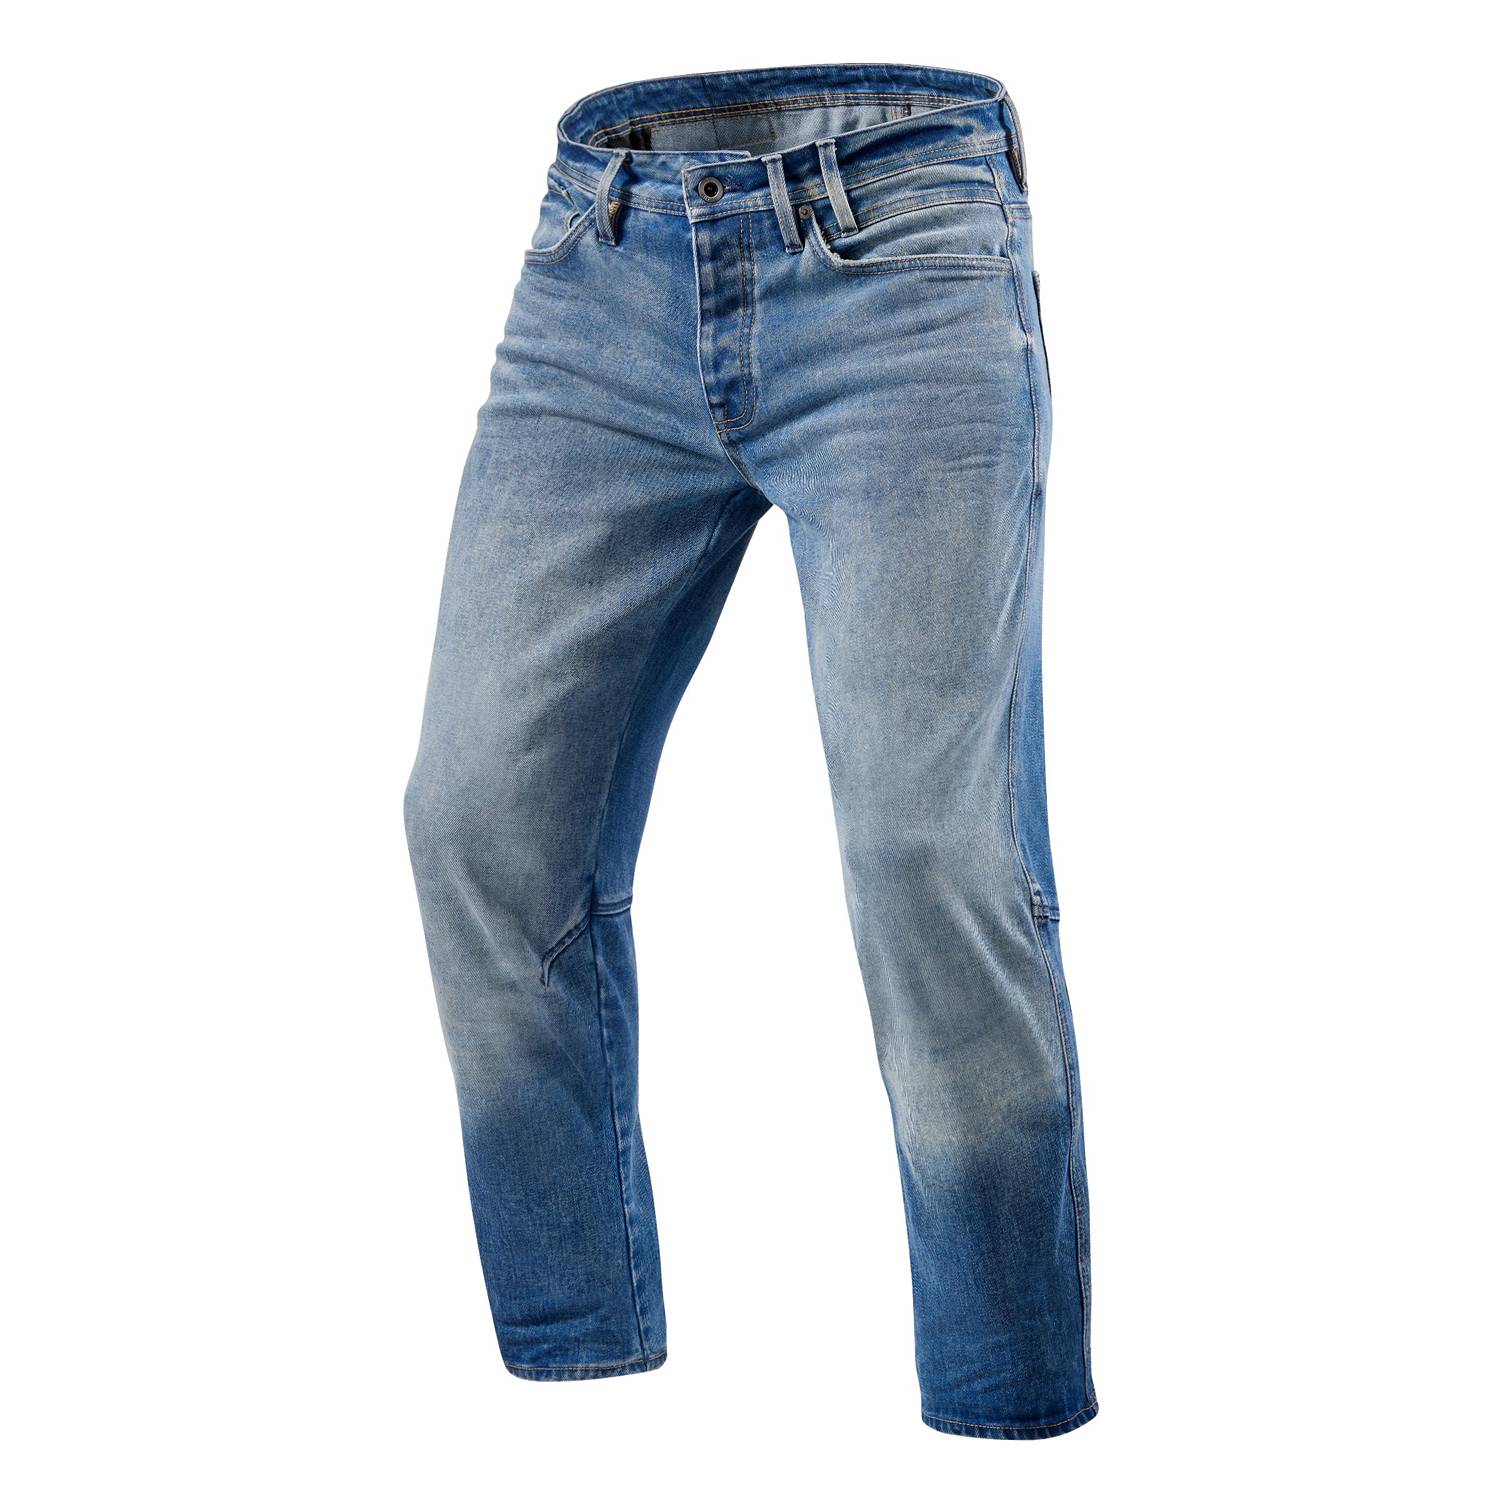 Image of EU REV'IT! Salt TF Mid Blue Used Motorcycle Jeans Taille L34/W31